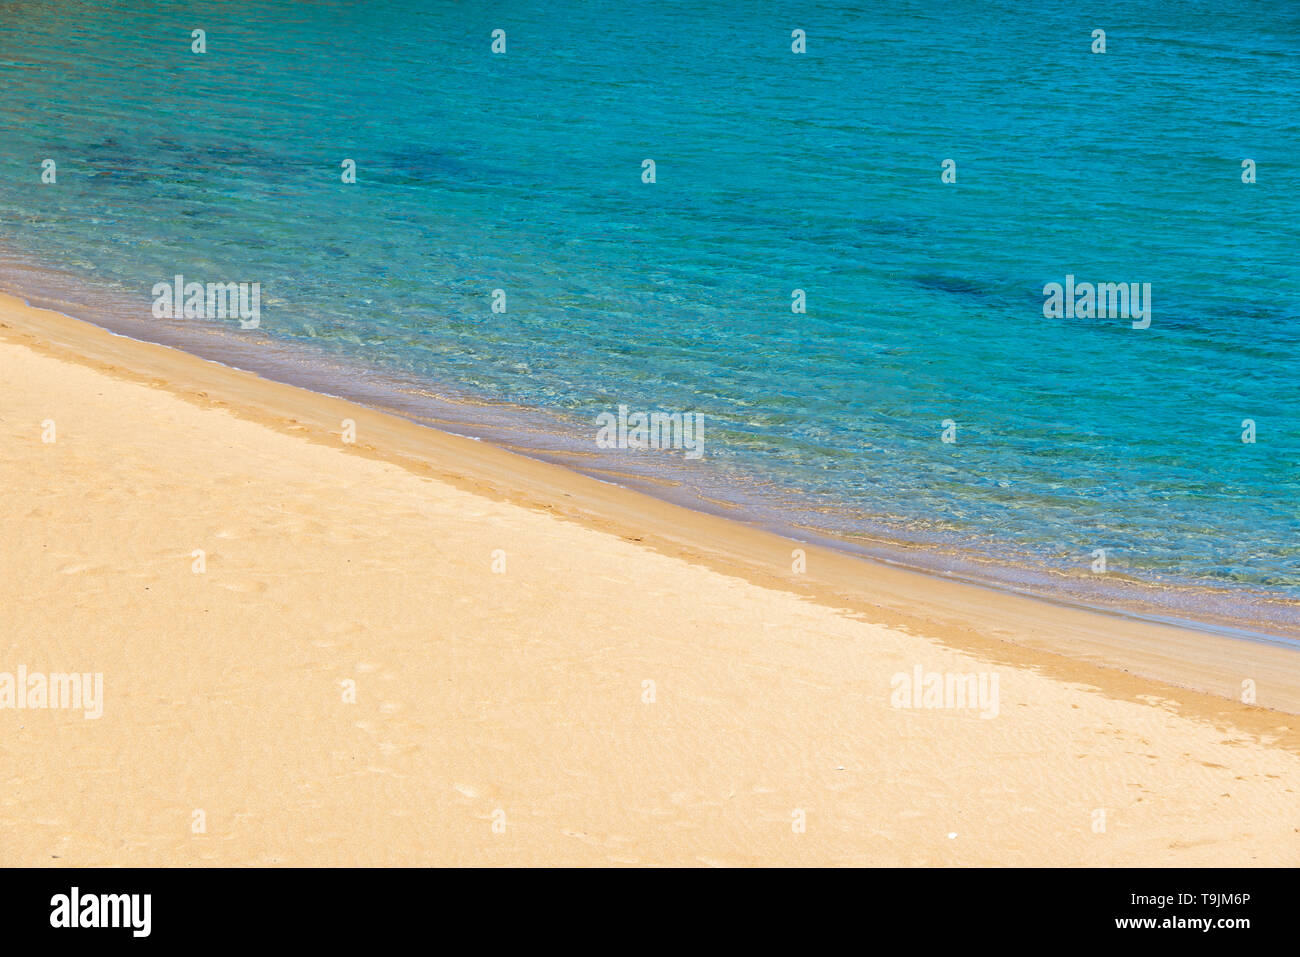 Beach with orange sand and blue water Stock Photo